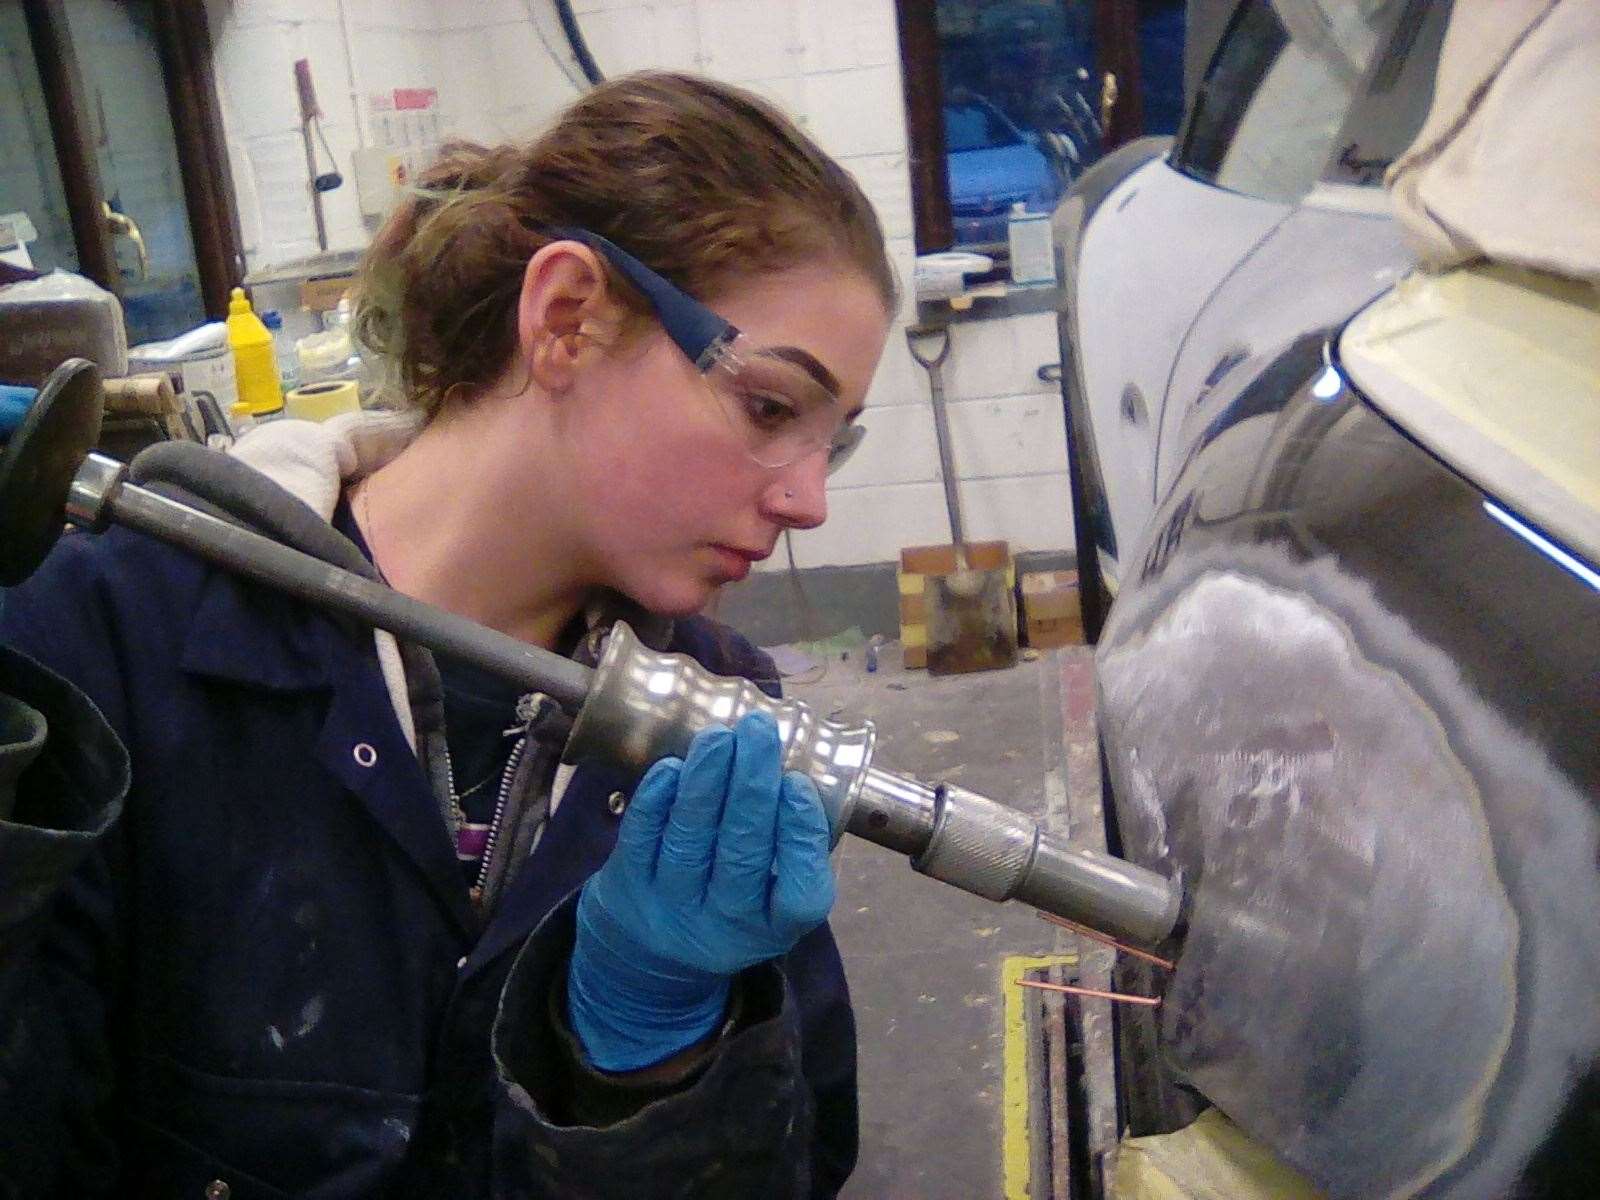 Millie had started her apprenticeship as a car paint sprayer. Picture: Greenway family/Summers